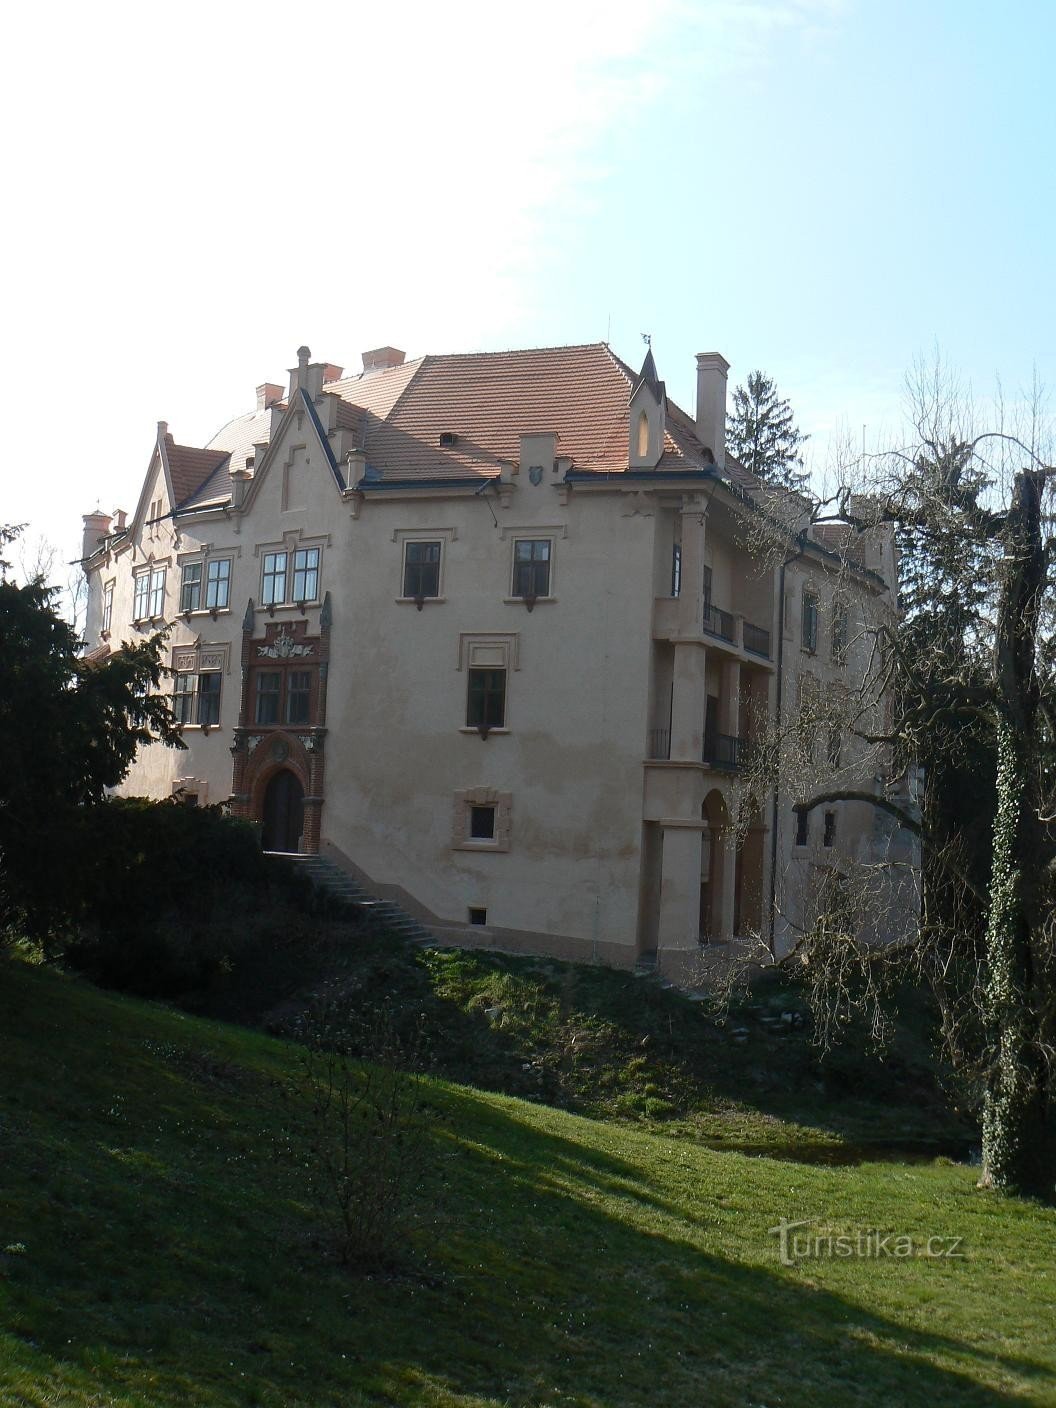 view of the castle from the park